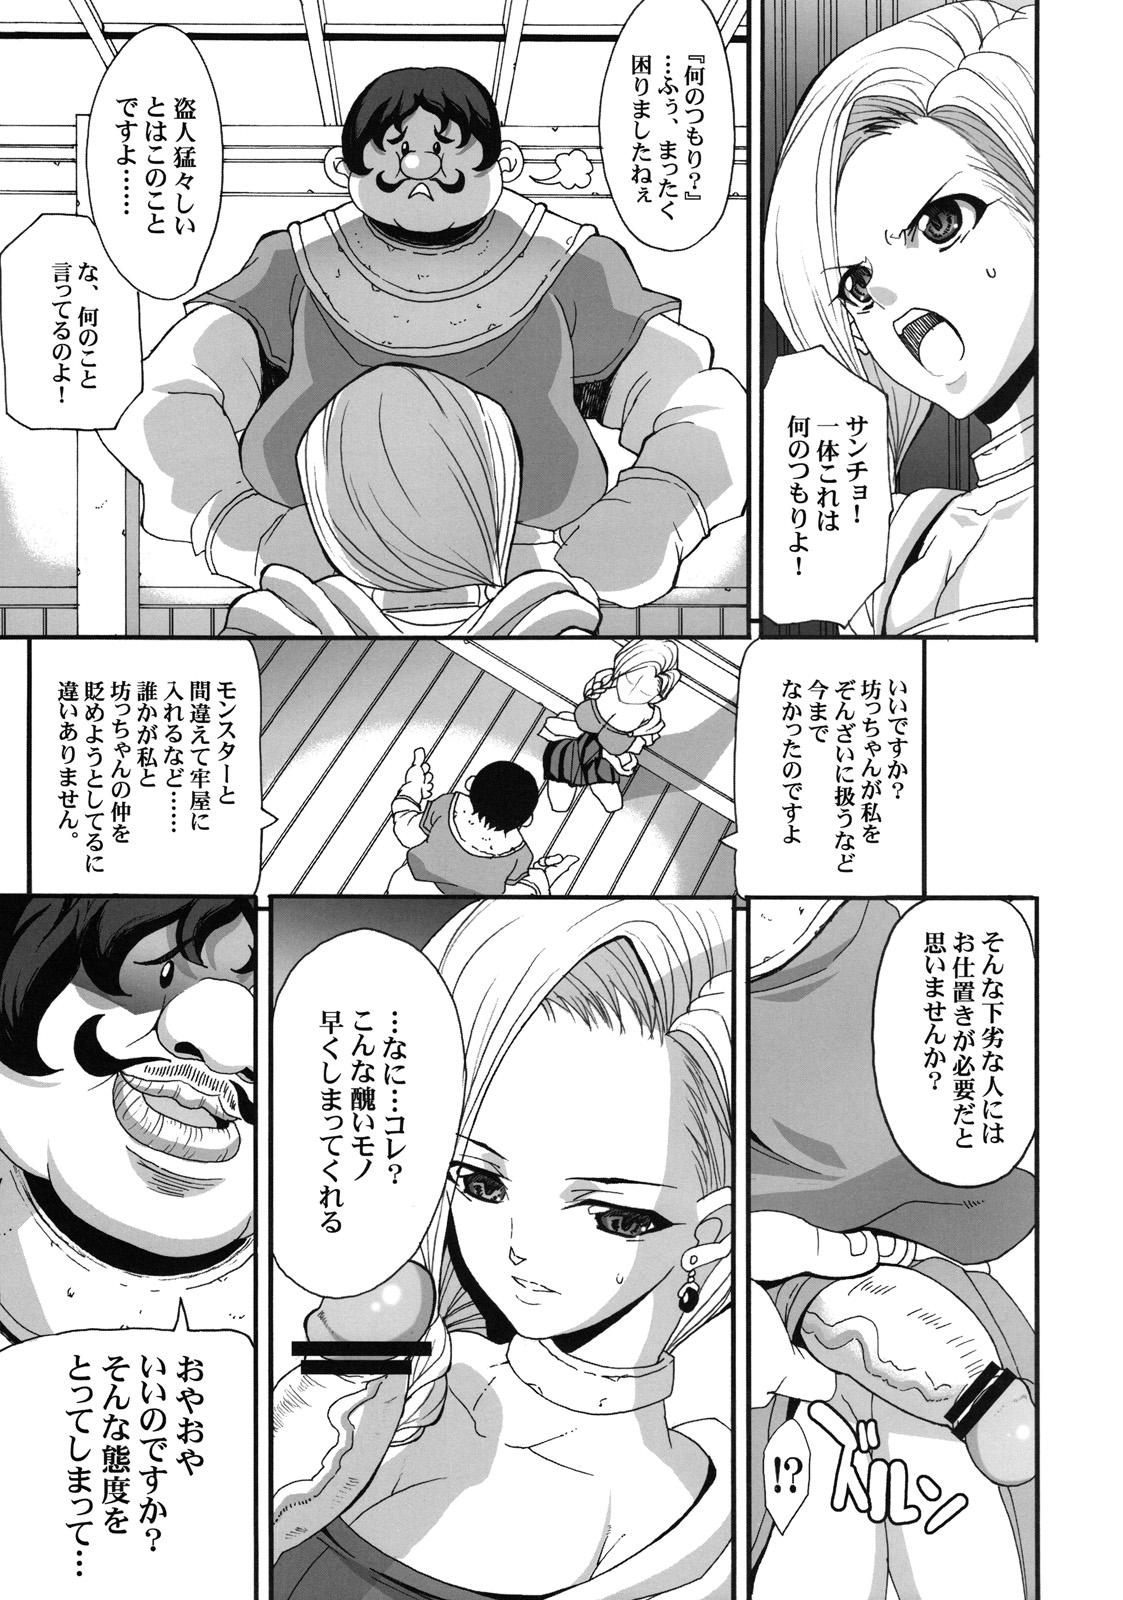 Ballbusting The Sancho - Dragon quest v Two - Page 7